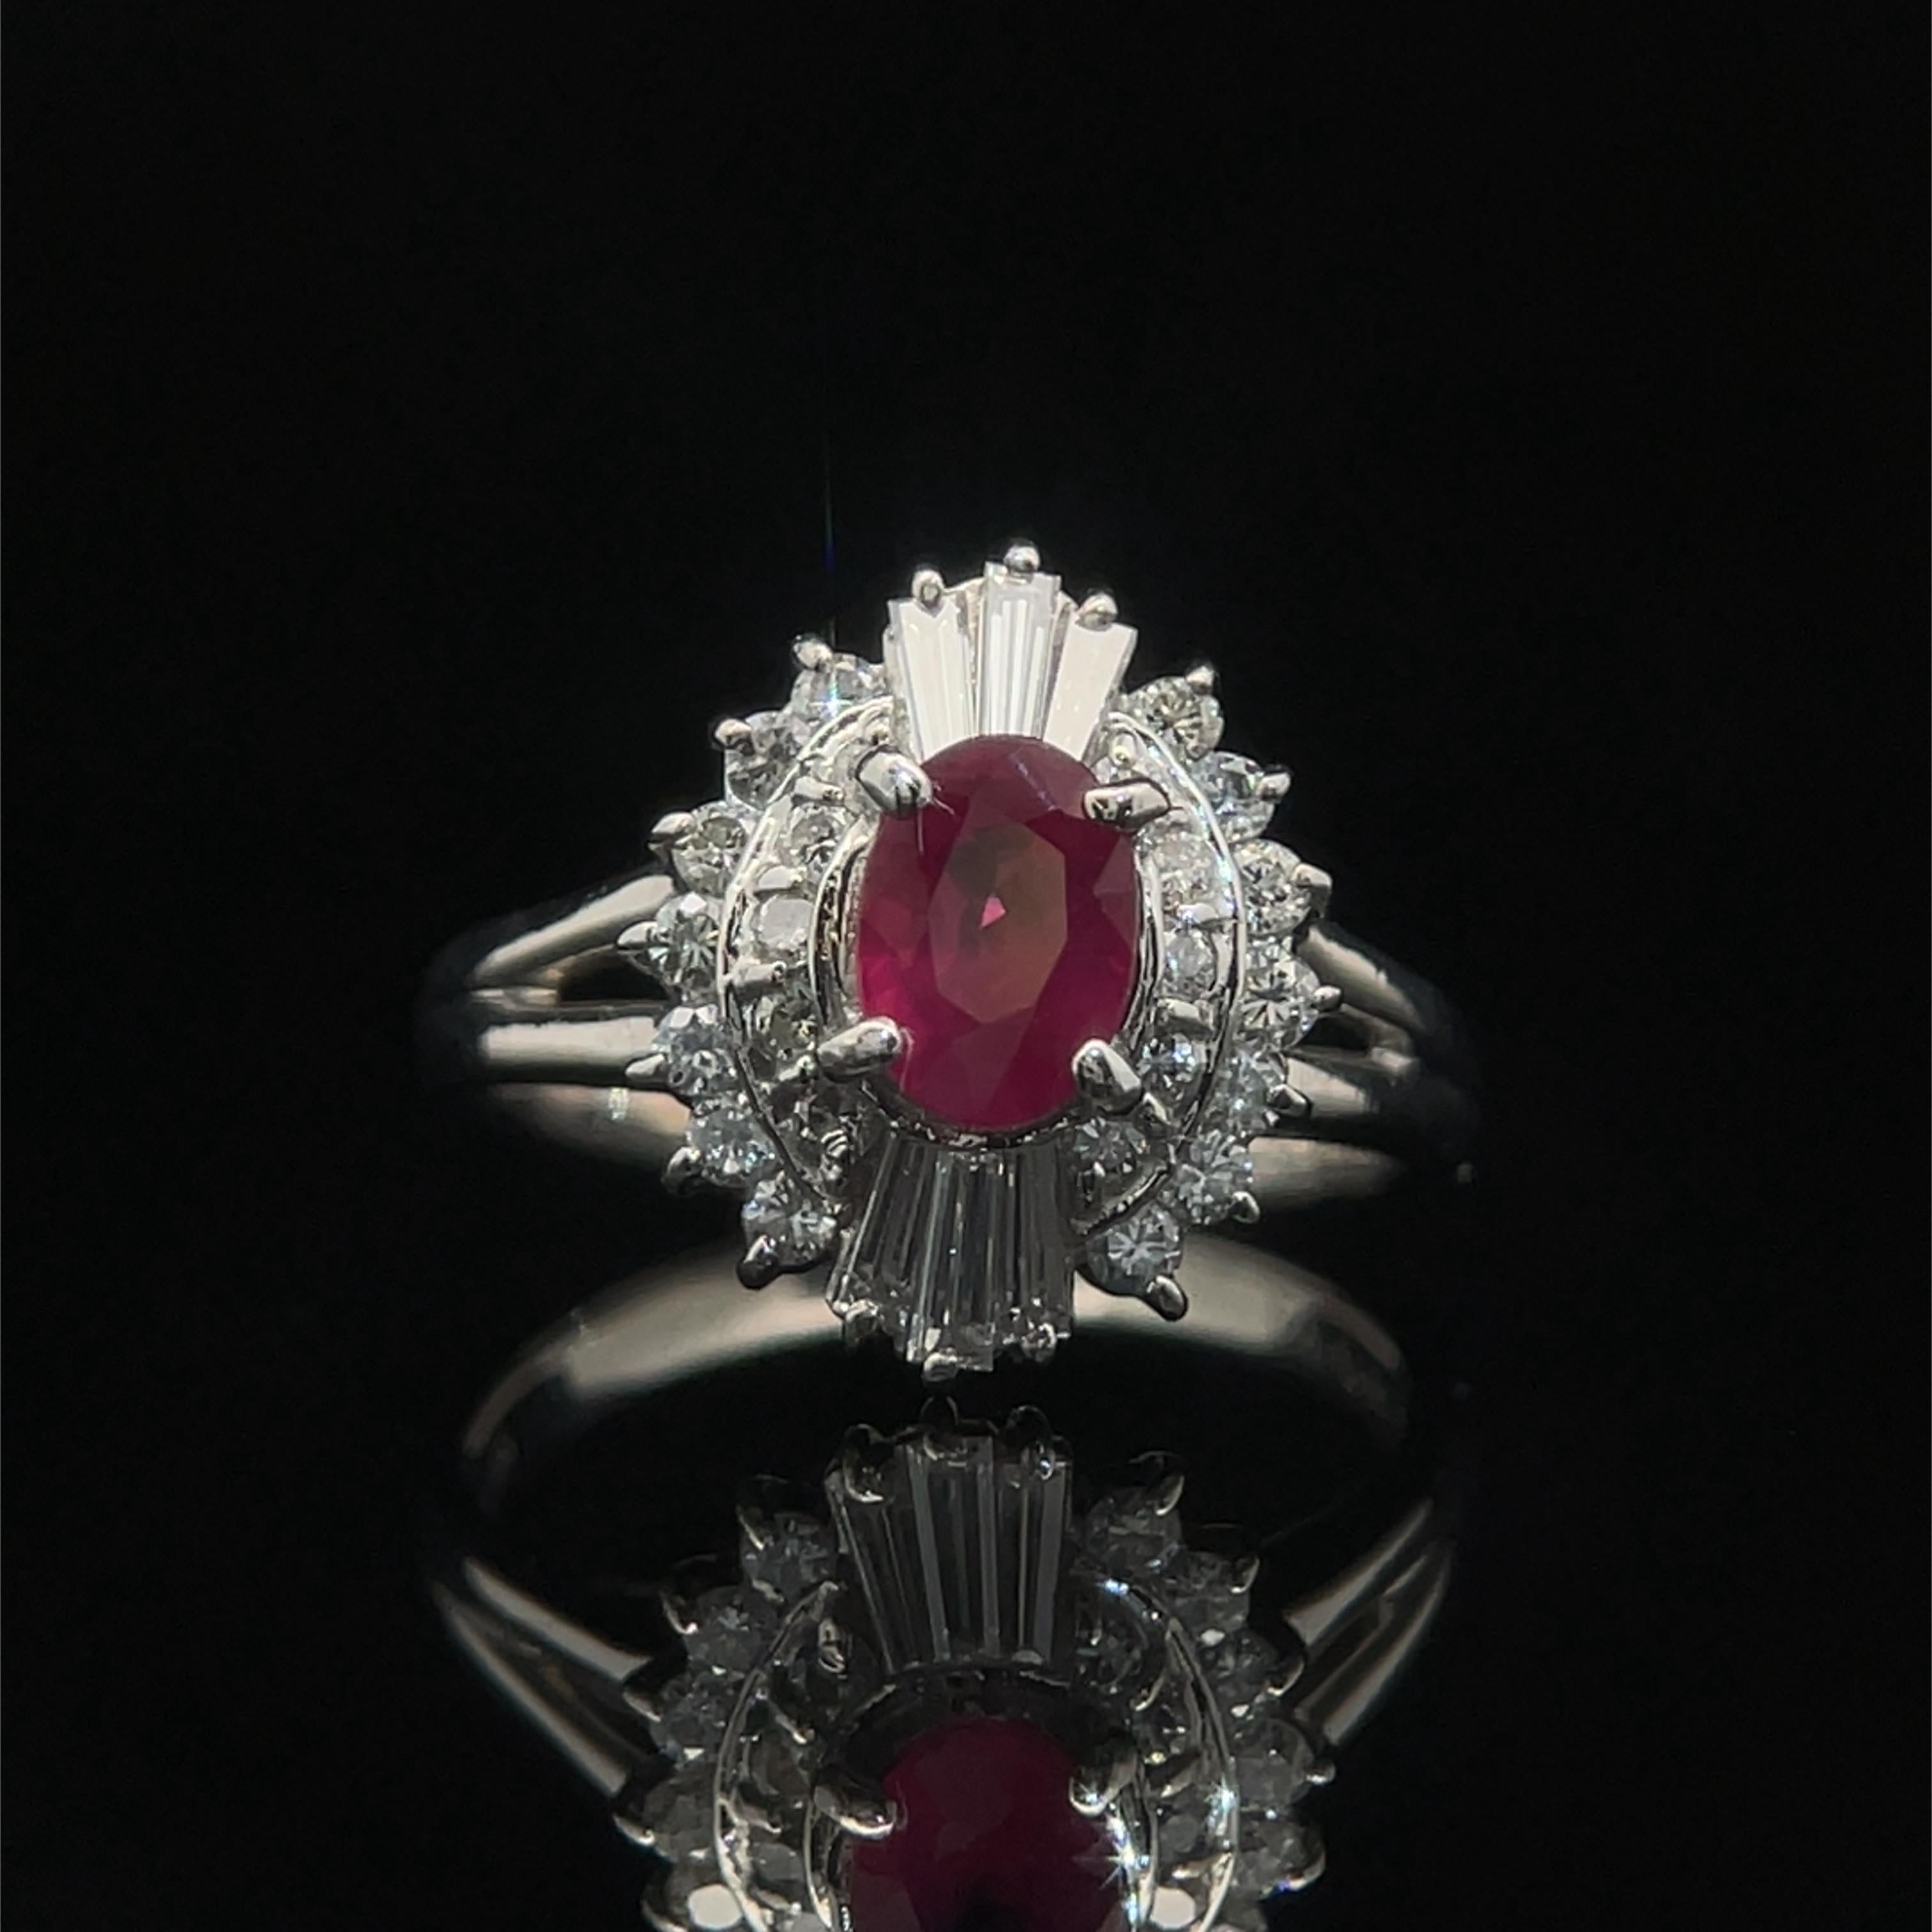 Elevate your elegance with our platinum estate ring, a dazzling showcase of glamour and sophistication. Anchored by a vibrant 0.79ct oval-cut ruby in a secure four-prong setting, the brilliance extends to a halo cluster of baguette and round